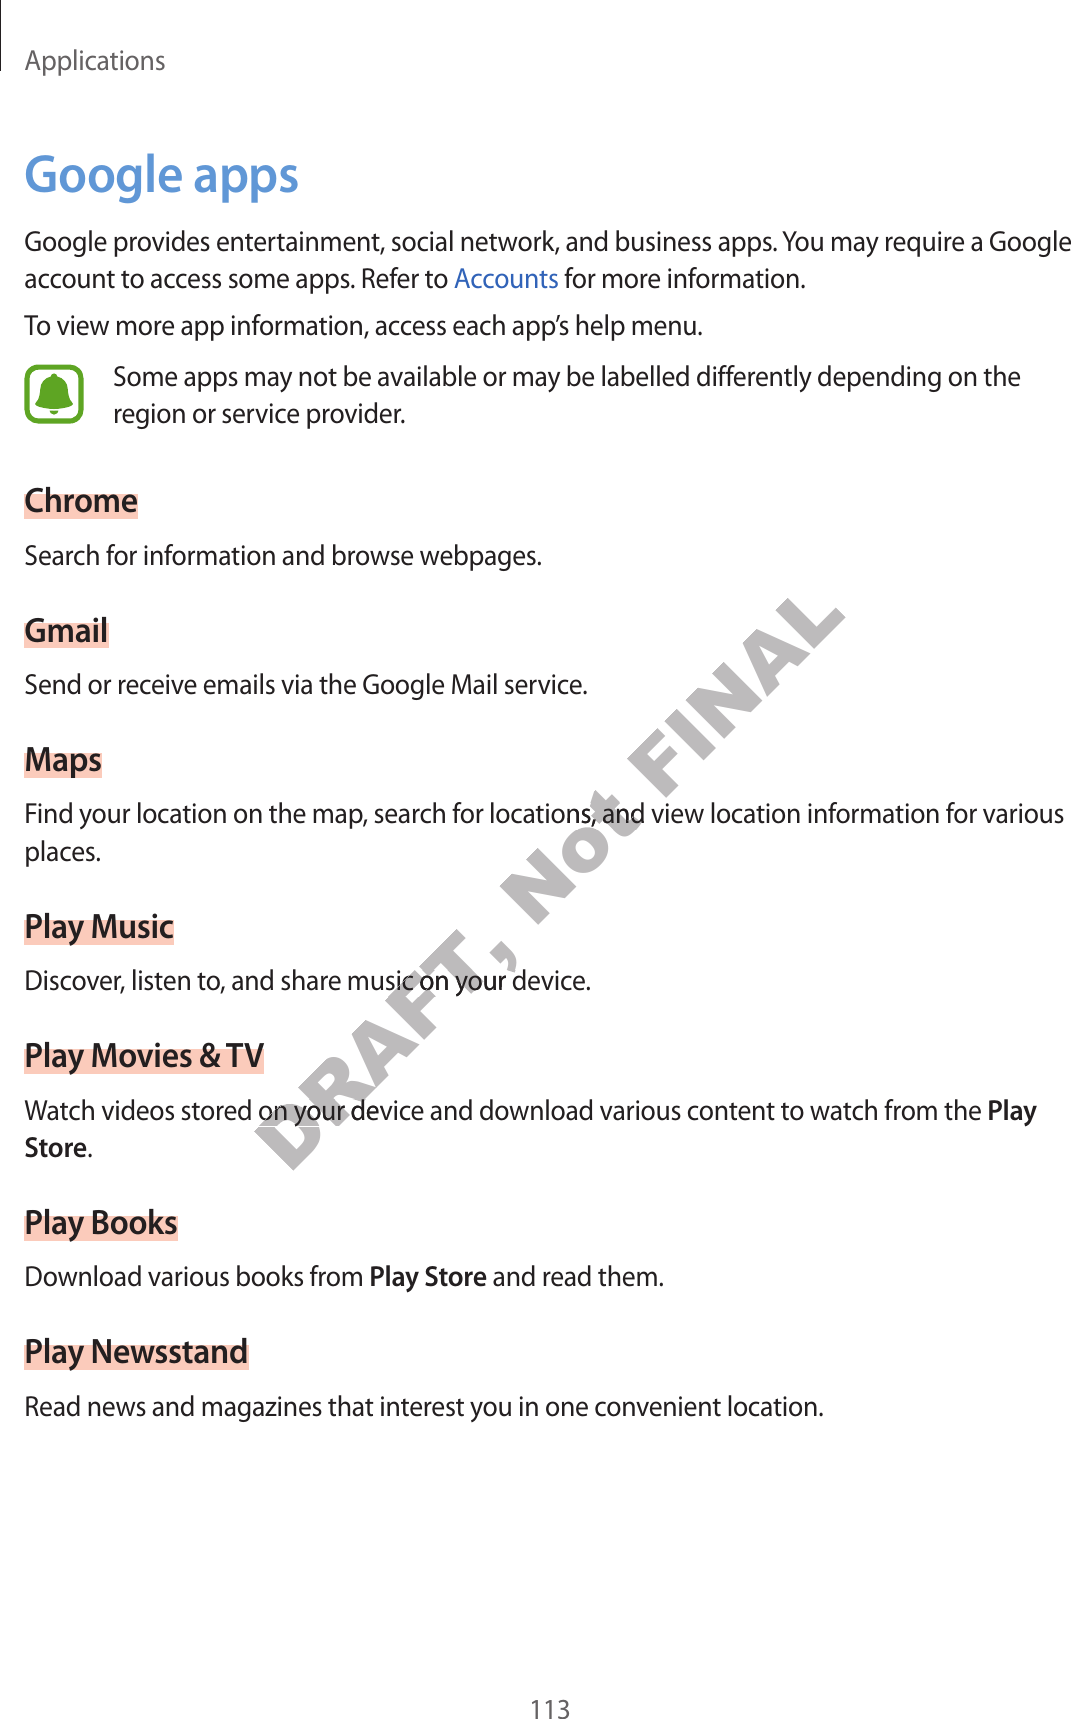 Applications113Google appsGoogle provides entertainment, social network, and business apps. You may require a Google account to access some apps. Refer to Accounts for more information.To view more app information, access each app’s help menu.Some apps may not be available or may be labelled differently depending on the region or service provider.ChromeSearch for information and browse webpages.GmailSend or receive emails via the Google Mail service.MapsFind your location on the map, search for locations, and view location information for various places.Play MusicDiscover, listen to, and share music on your device.Play Movies &amp; TVWatch videos stored on your device and download various content to watch from the Play Store.Play BooksDownload various books from Play Store and read them.Play NewsstandRead news and magazines that interest you in one convenient location.DRAFT, e music on your device music on your devicDRAFT, ed on your deviced on your devicNot tions, and view locations, and view locaFINAL